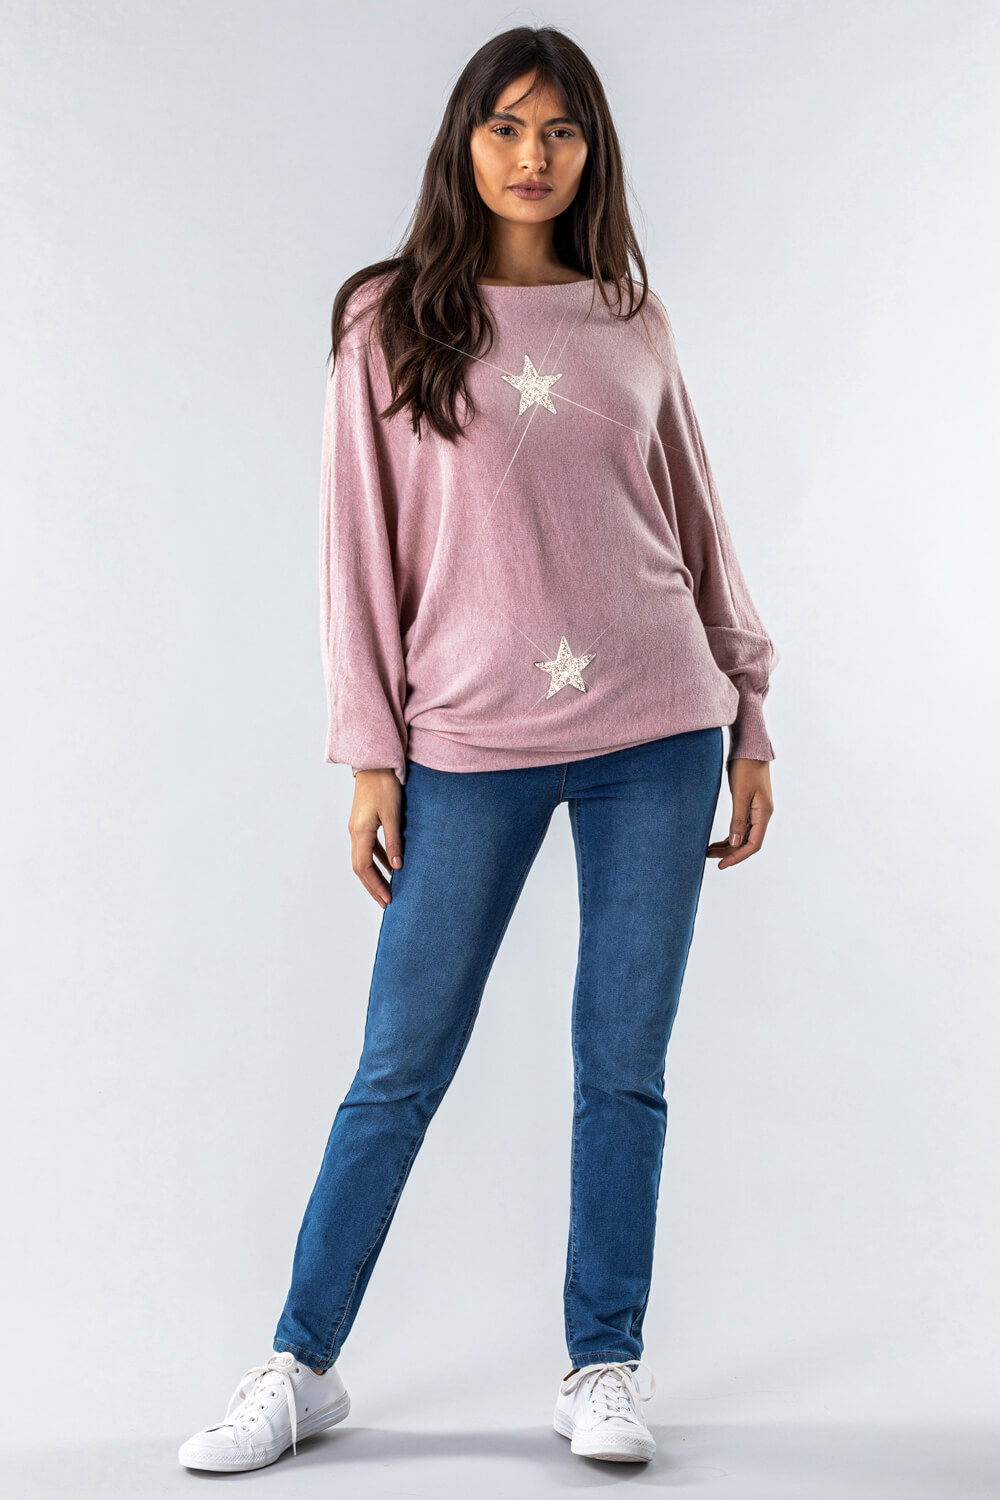 PINK One Size Knitted Star Lounge Jumper, Image 2 of 3